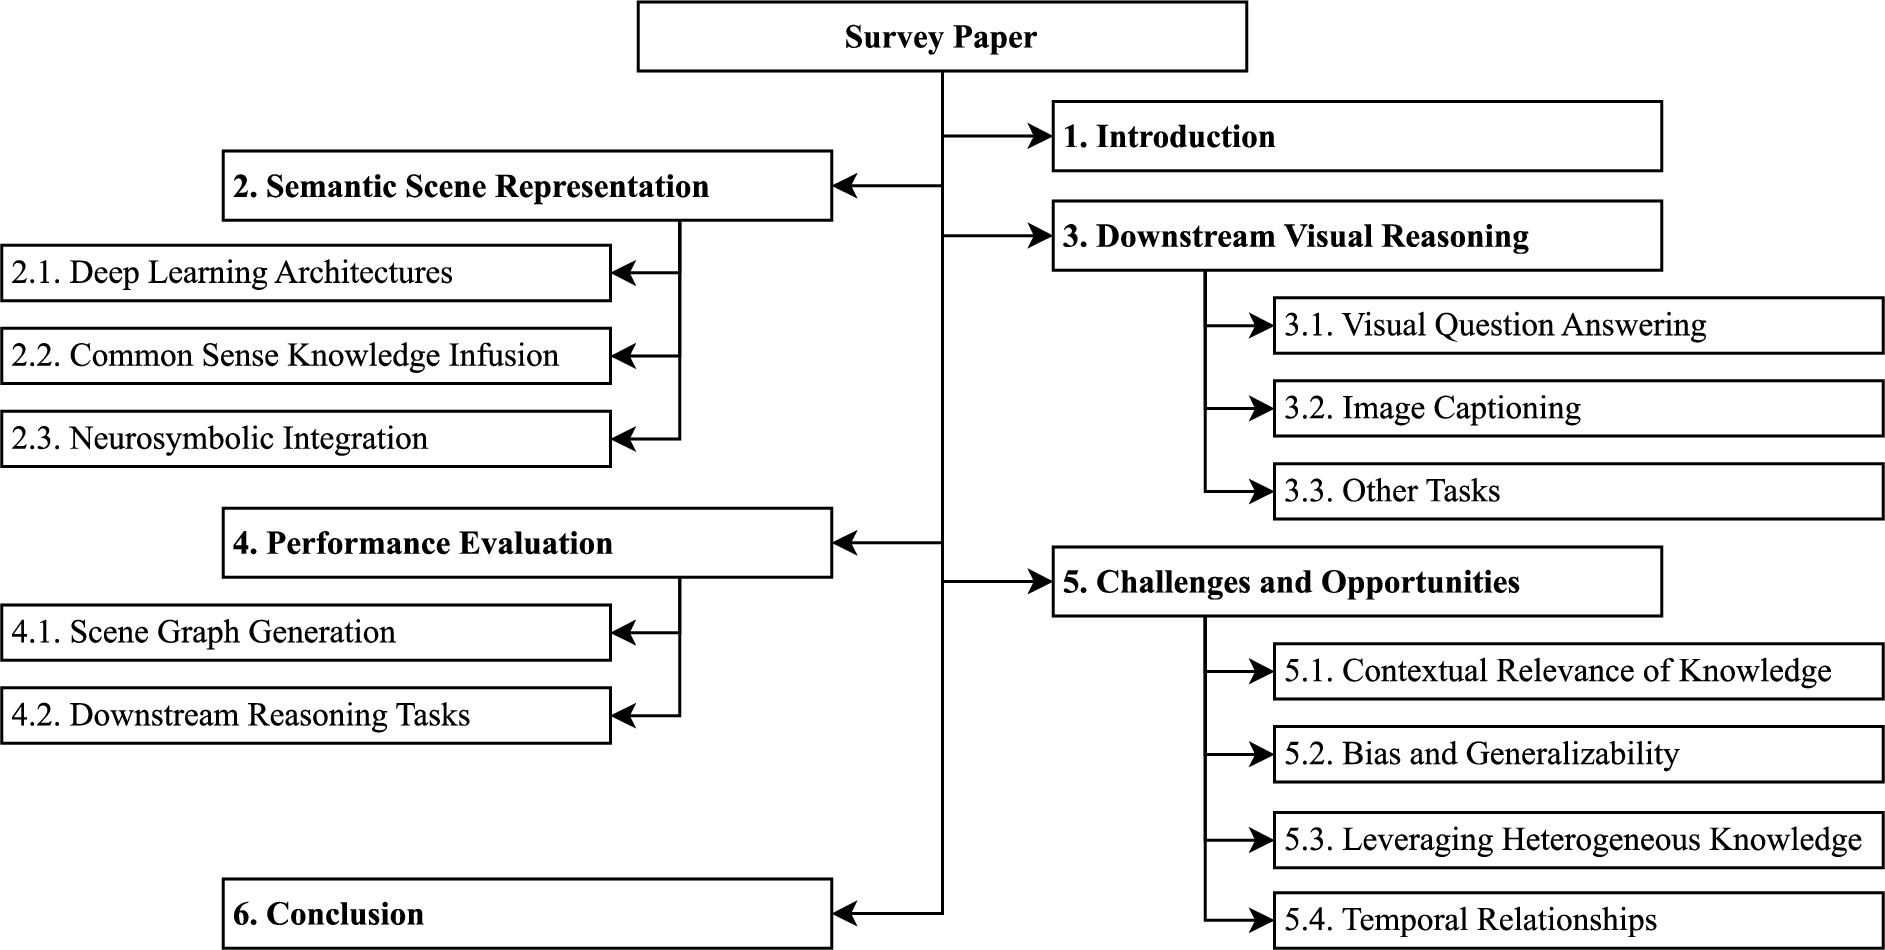 Structure of the survey paper.